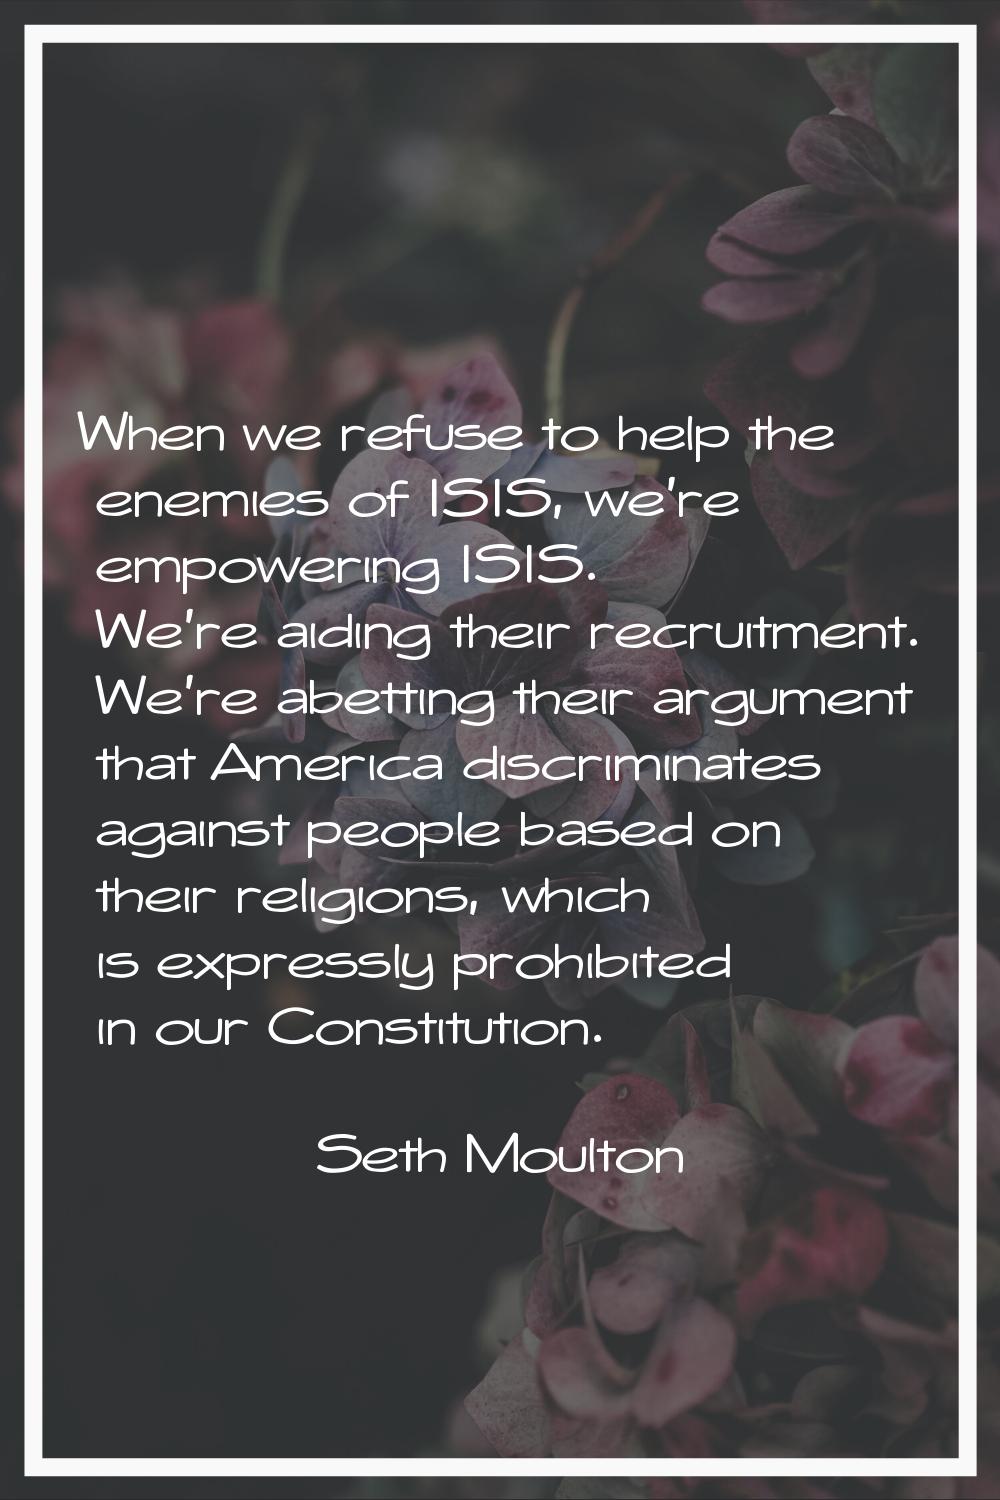 When we refuse to help the enemies of ISIS, we're empowering ISIS. We're aiding their recruitment. 